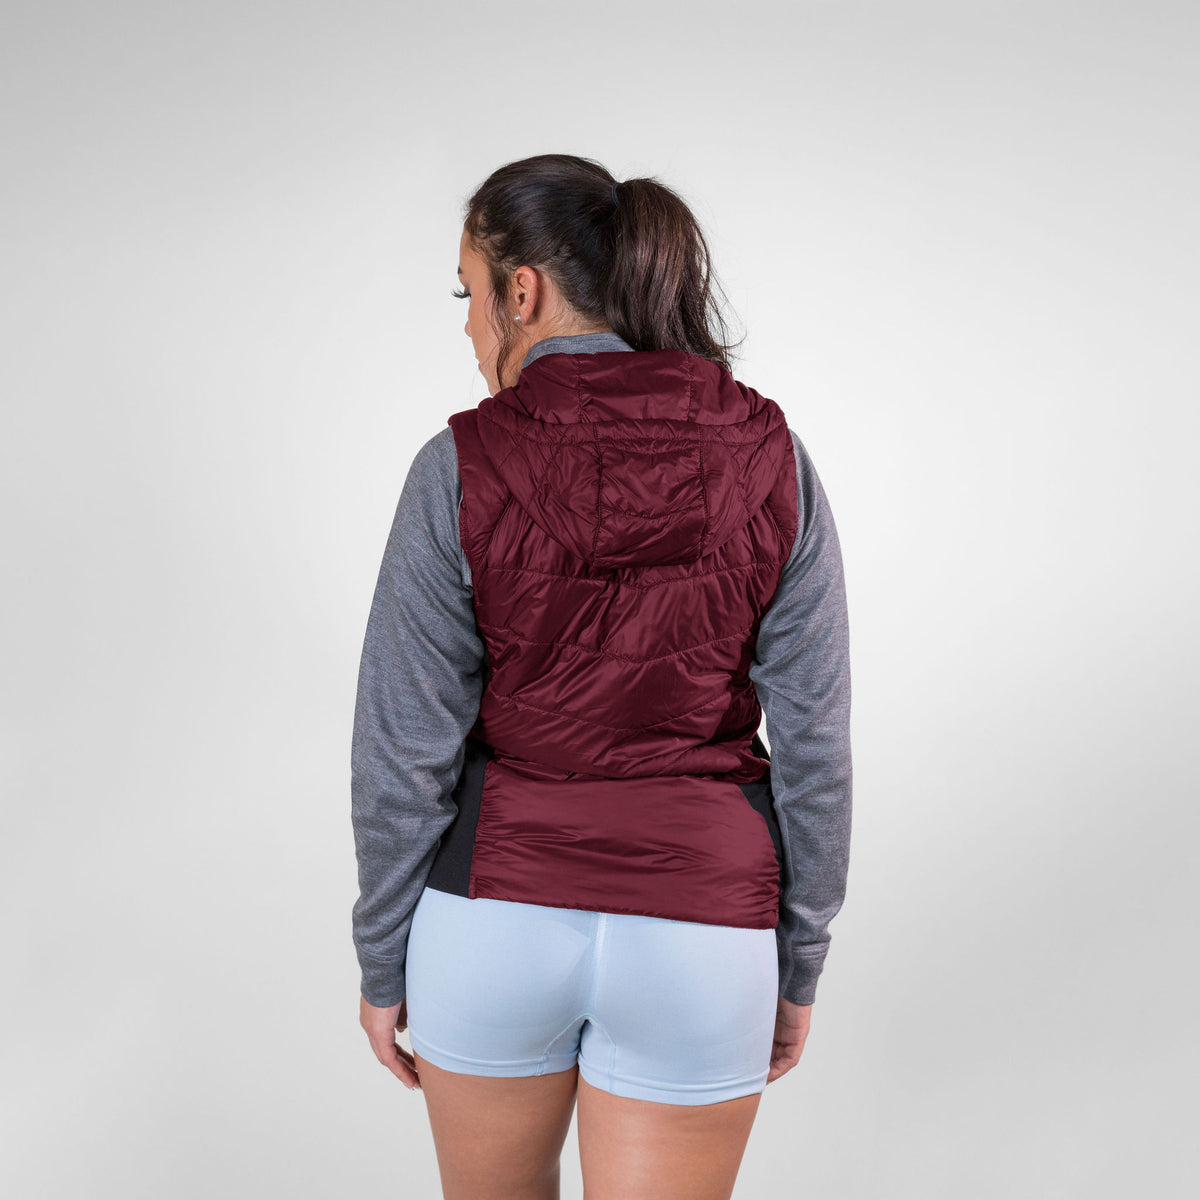 A brown haired woman facing away from the camera in front of a white background. She is wearing light blue athletic shorts, a gray Alpacas of Montana women&#39;s base layer top, and a cranberry red Alpacas of Montana lightweight athletic activewear outerwear breathable moisture wicking antimicrobial soft comfortable exercise alpaca women&#39;s stretch lite vest for running sports exercise work out hiking climbing camping biking